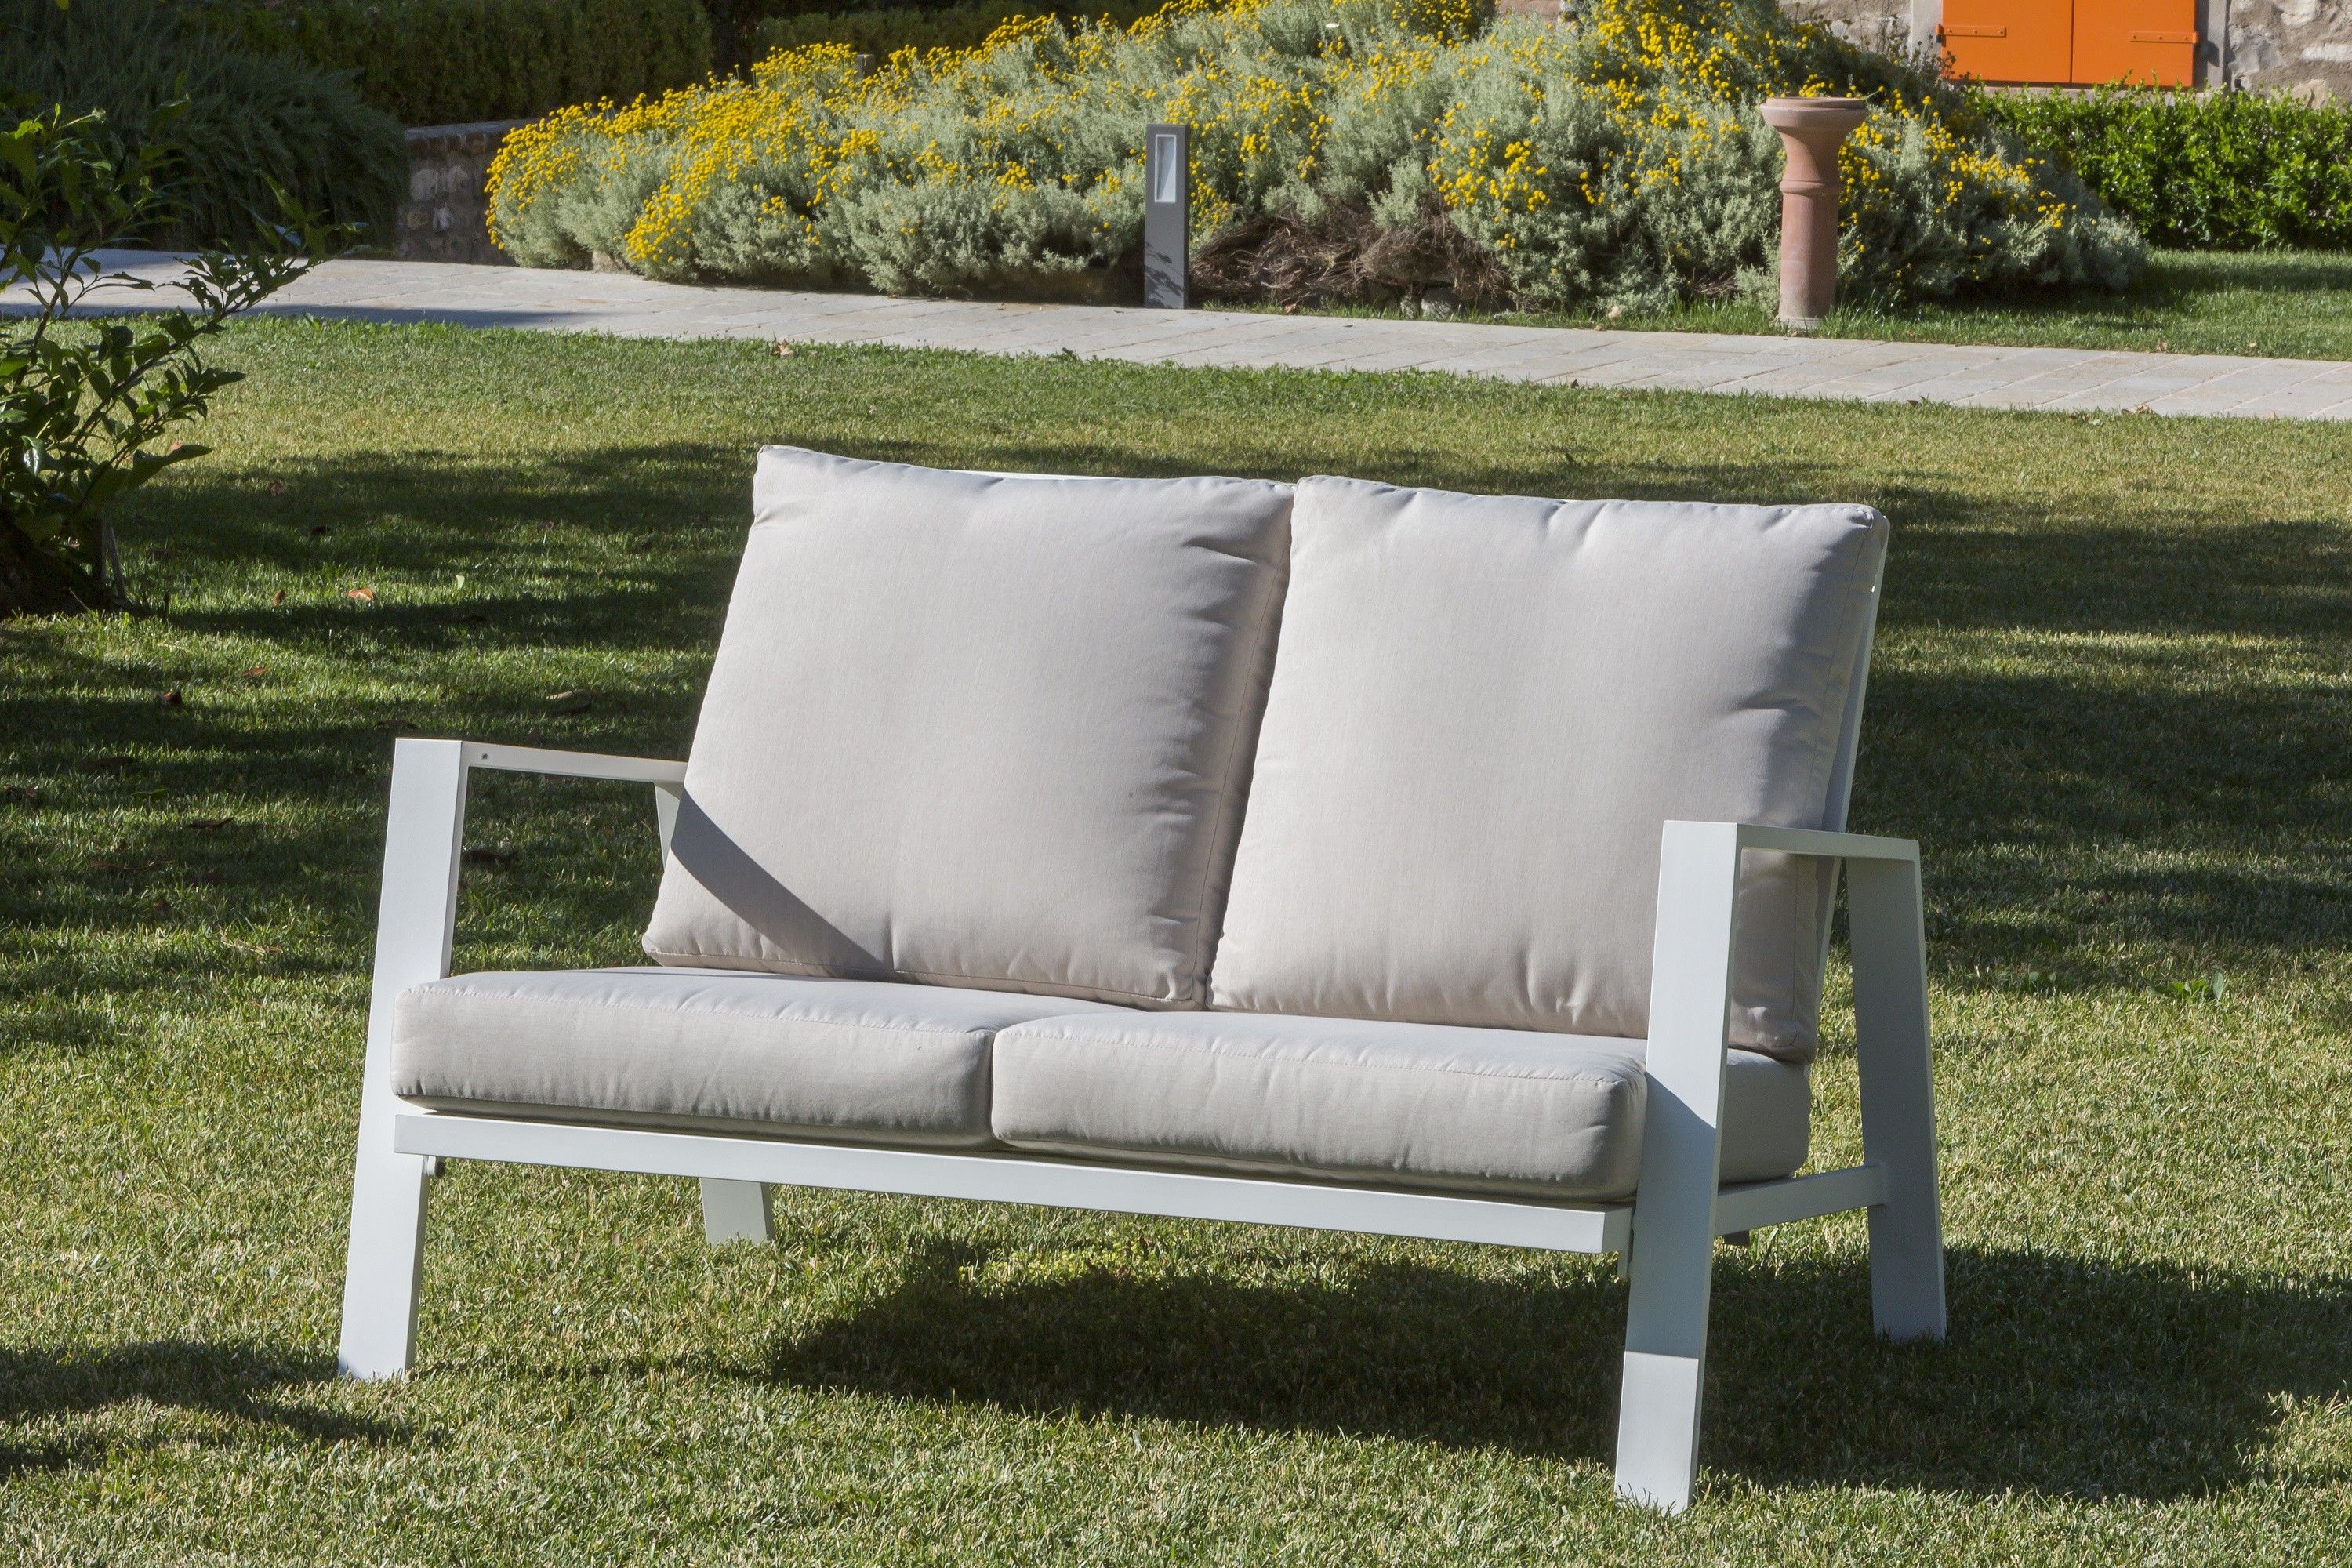 Lipari White Aluminum Lounge Set And Sand Cushions For Outdoors And Indoors Throughout Outdoor Sand Cushions Loveseats (View 4 of 15)